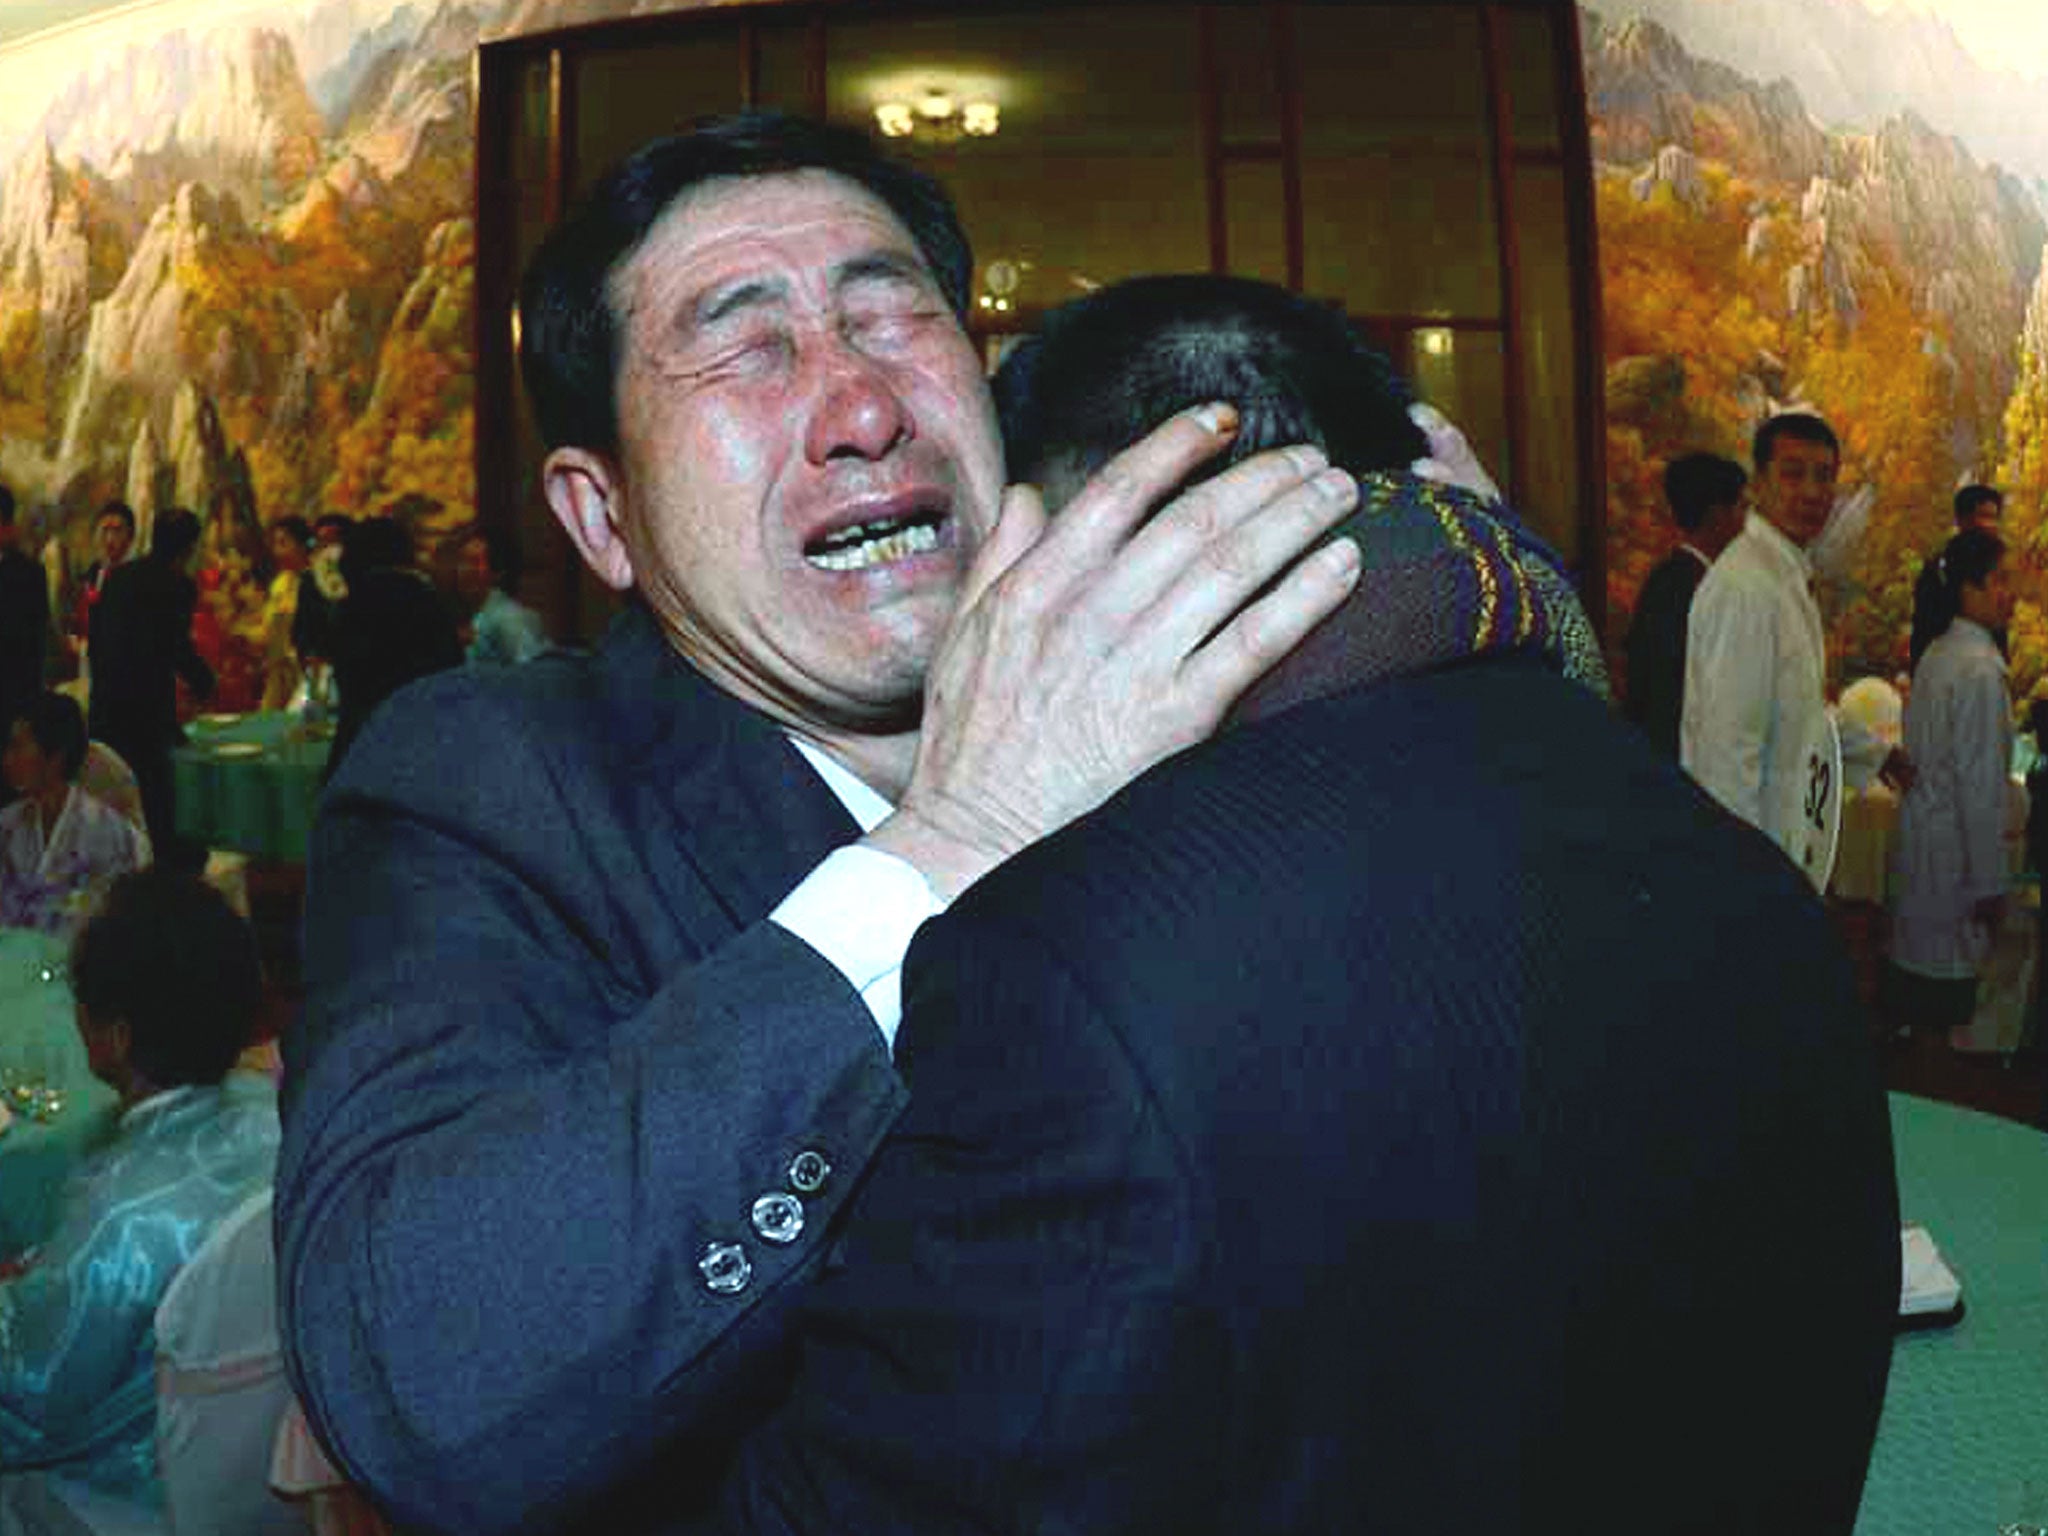 South Korean Park Yang-Gon (L) meets with his North Korean brother Park Yang-Soo during a family reunion after being separated for 60 years in Mount Kumgang